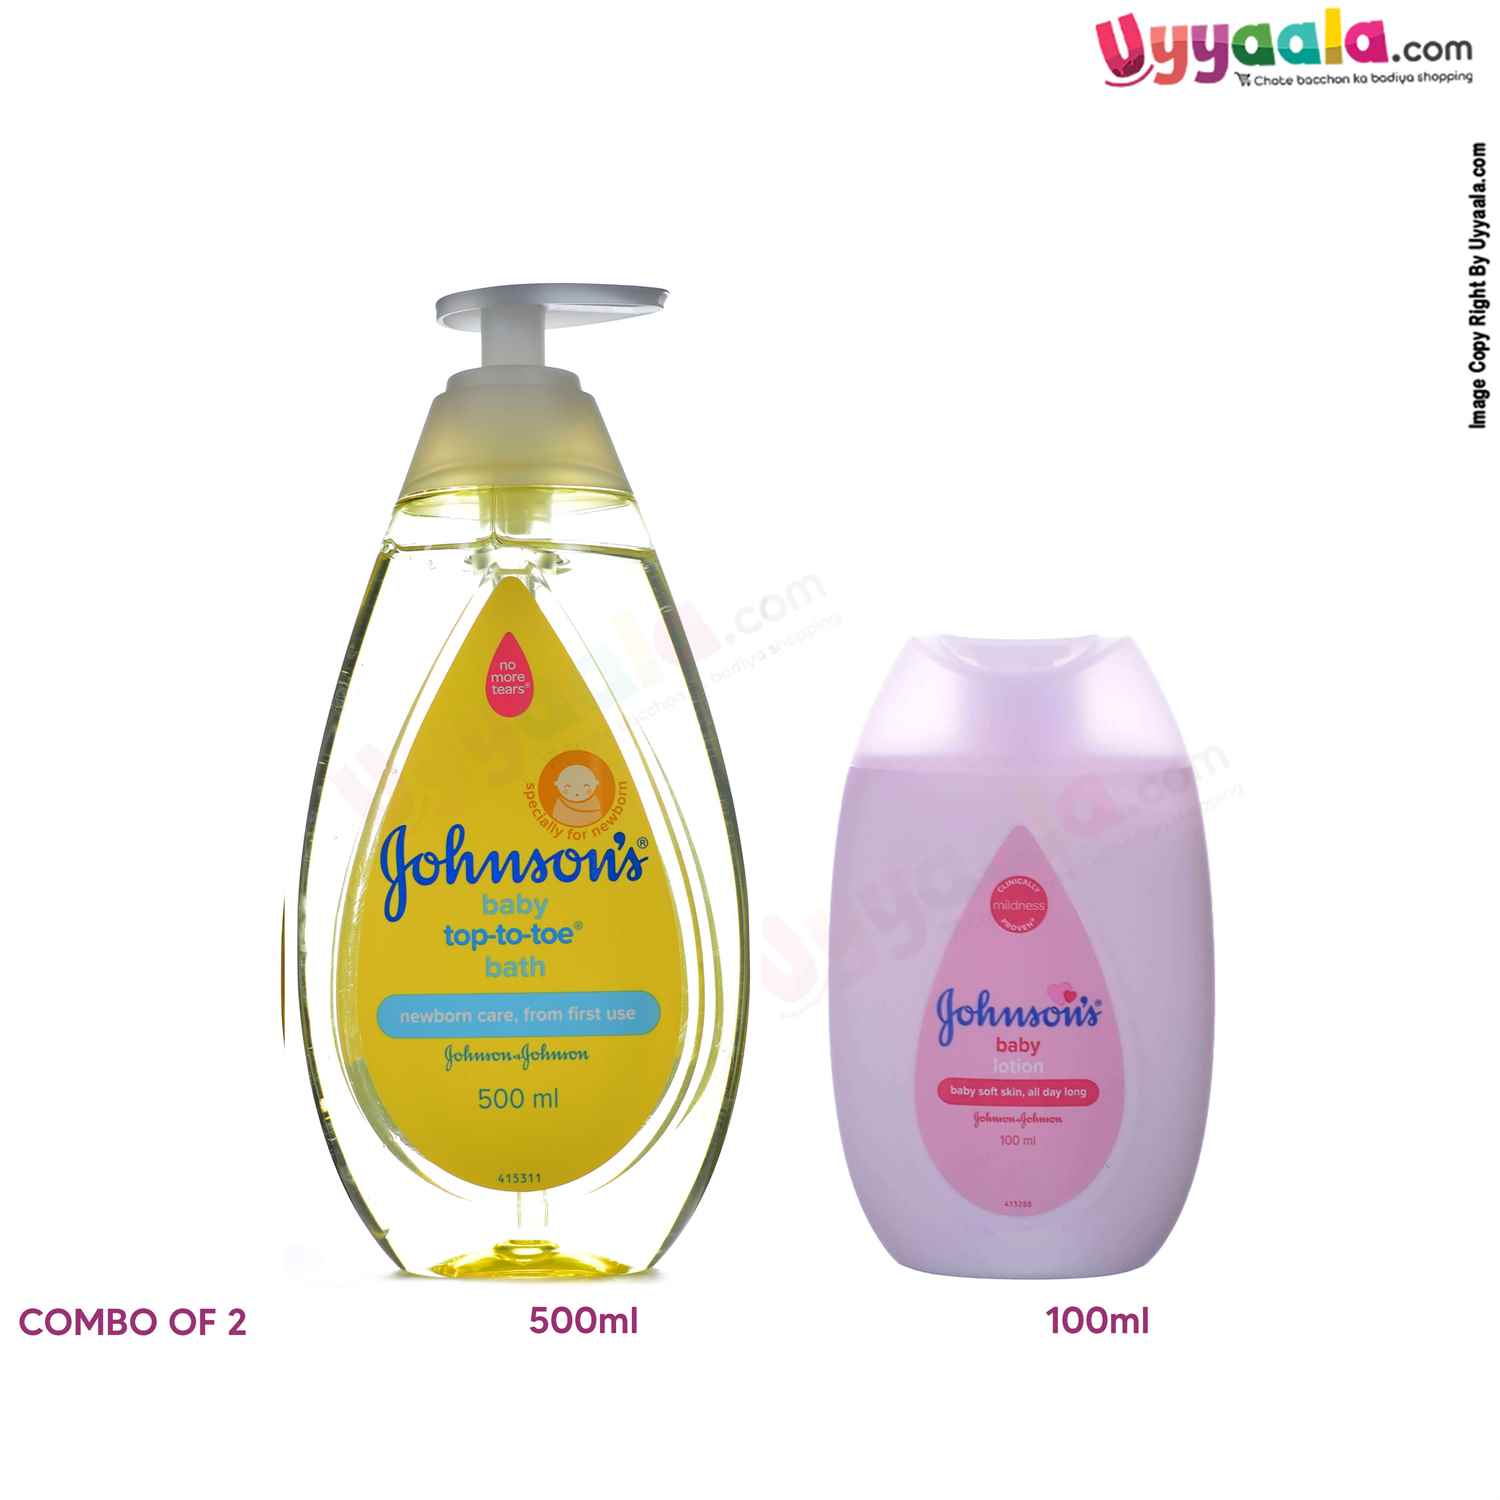 JOHNSONS Baby Top-To-Toe Bath 500ml & Baby Lotion 100ml ( Combo of 2 )